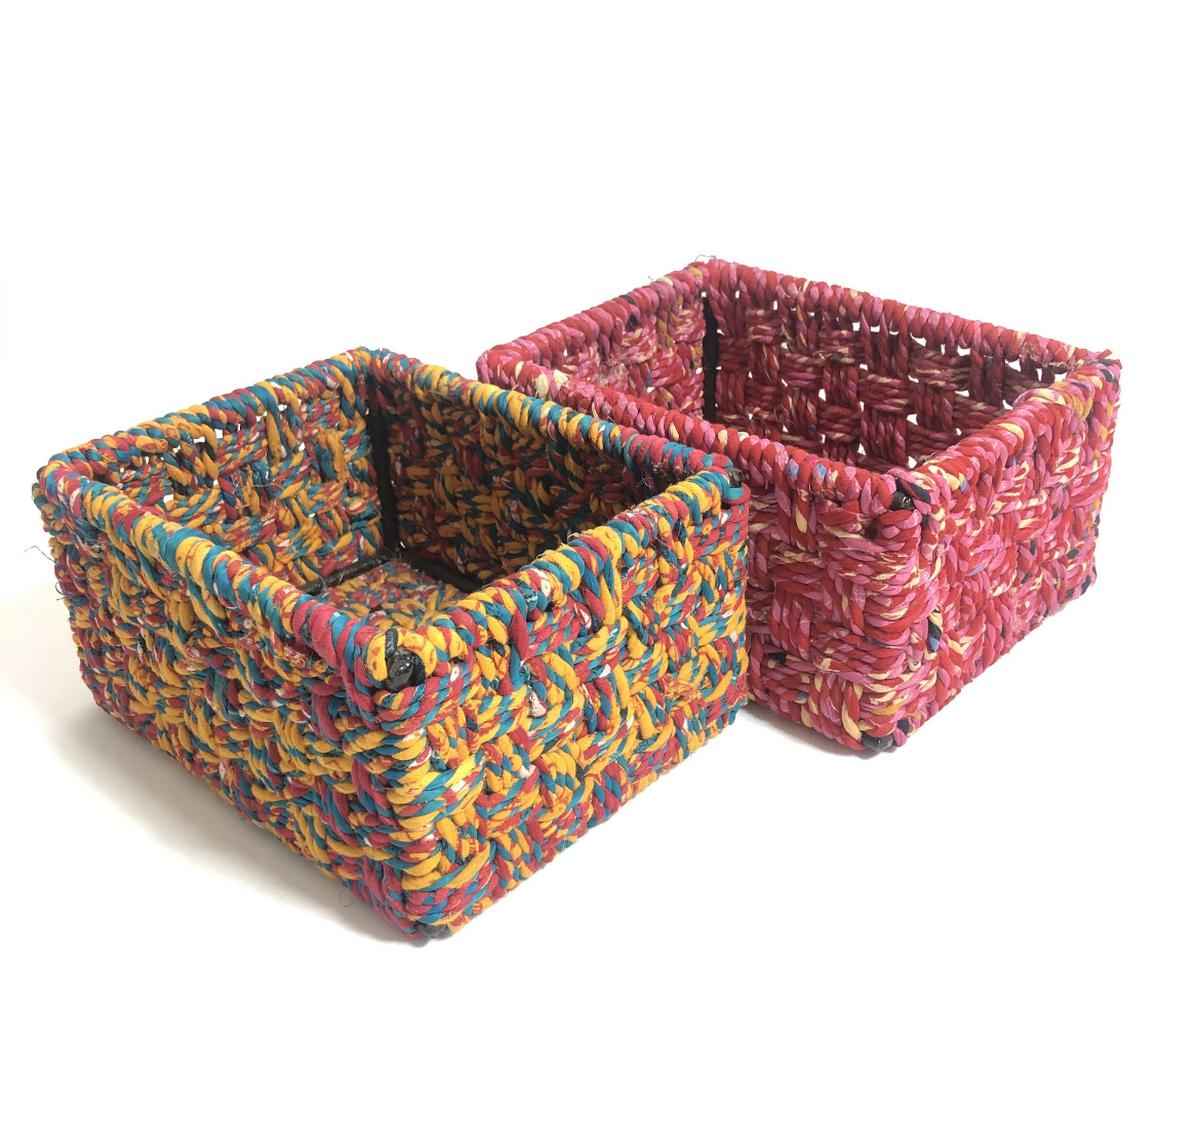 Storage baskets crafted at Rimagined